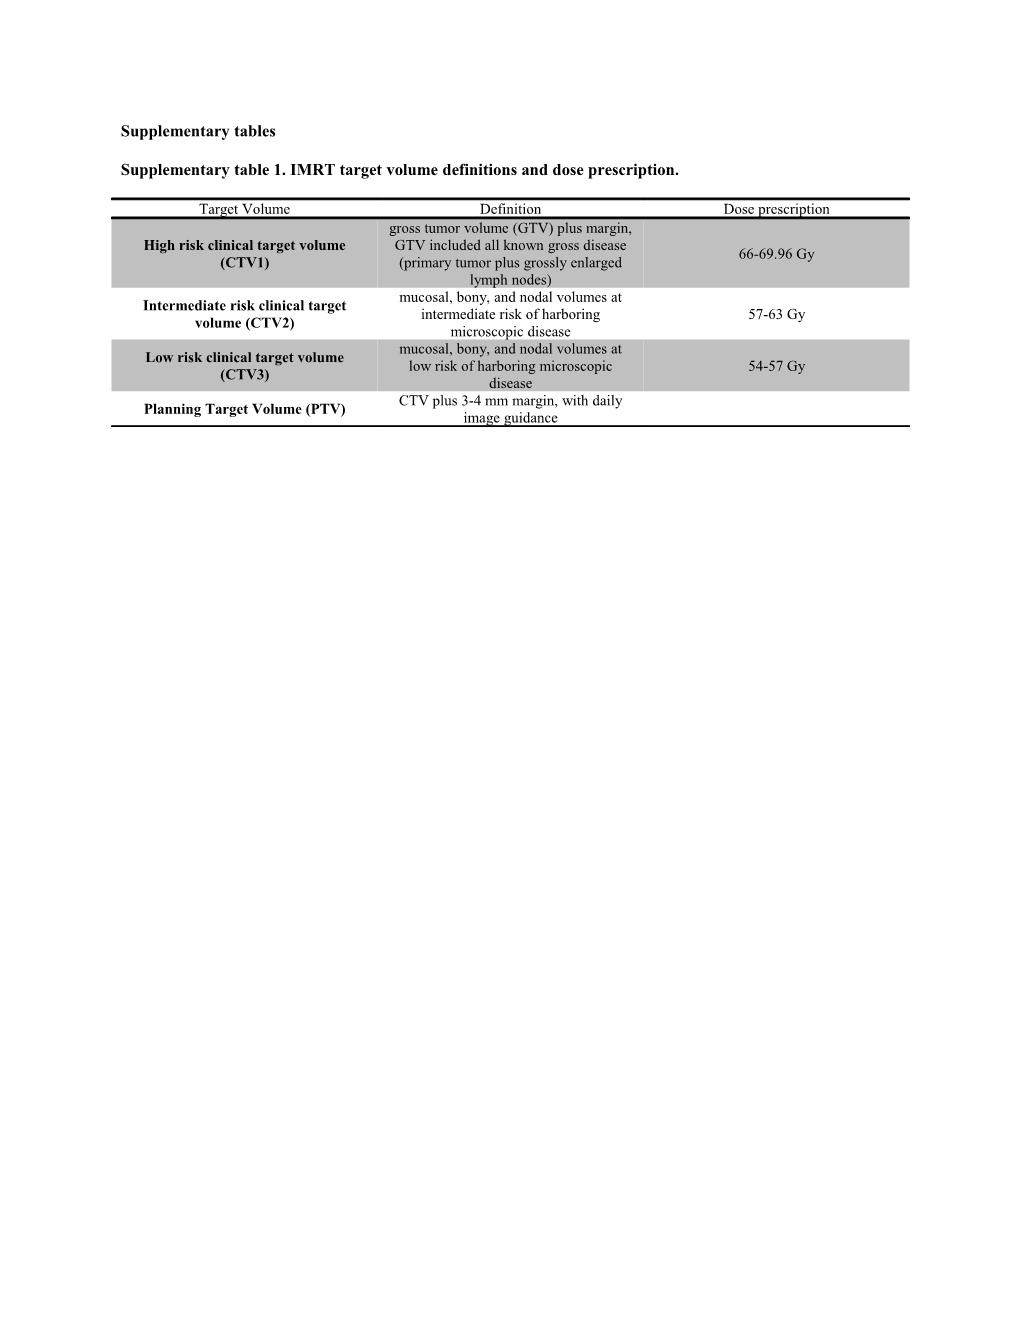 Supplementary Table 1. IMRT Target Volume Definitions and Dose Prescription